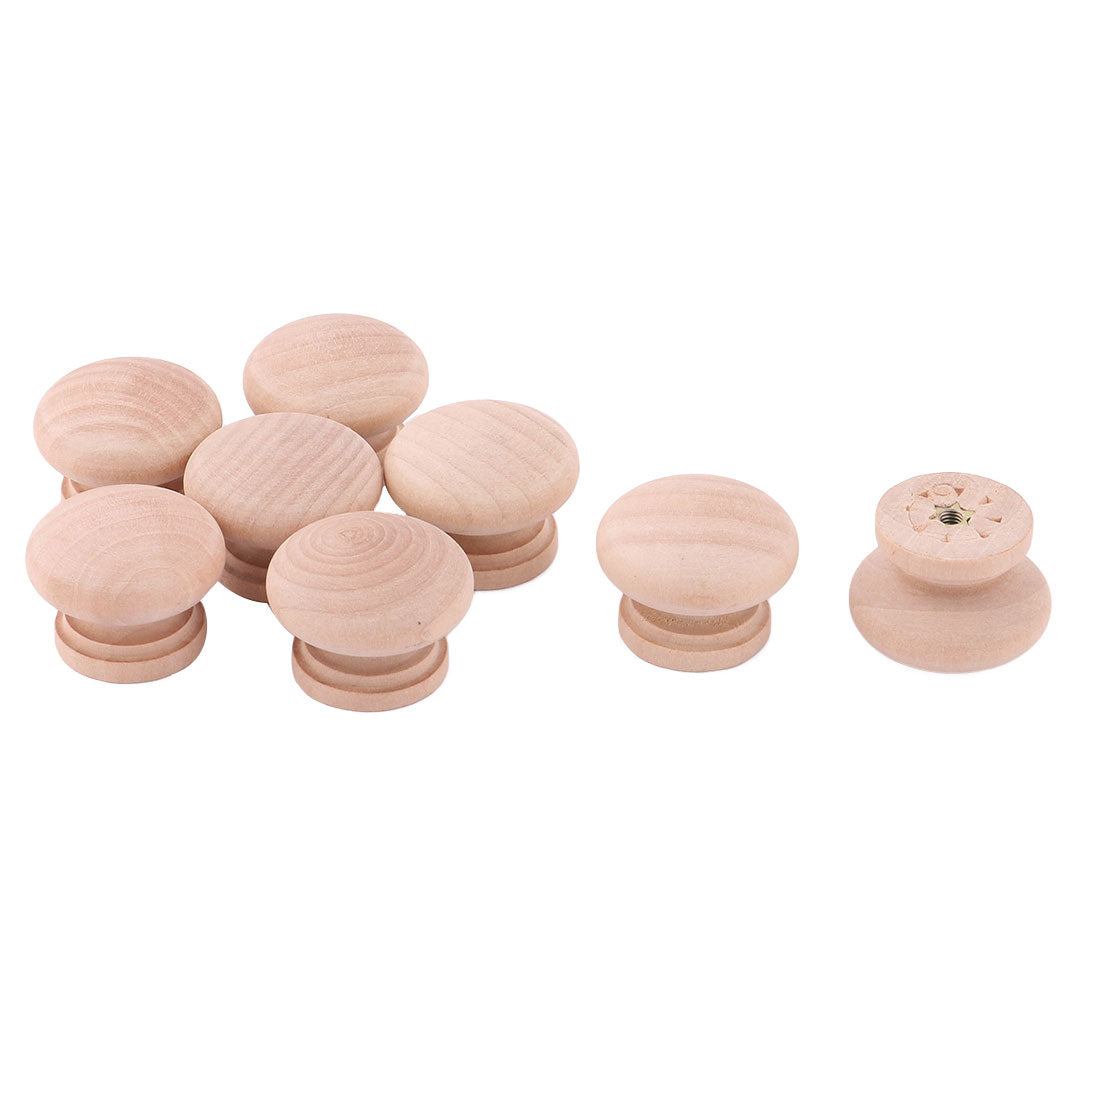 uxcell Uxcell Home Bedroom Wood Door Handle Knob Drawer Cabinet decoration Pull Grip Beige 8pcs